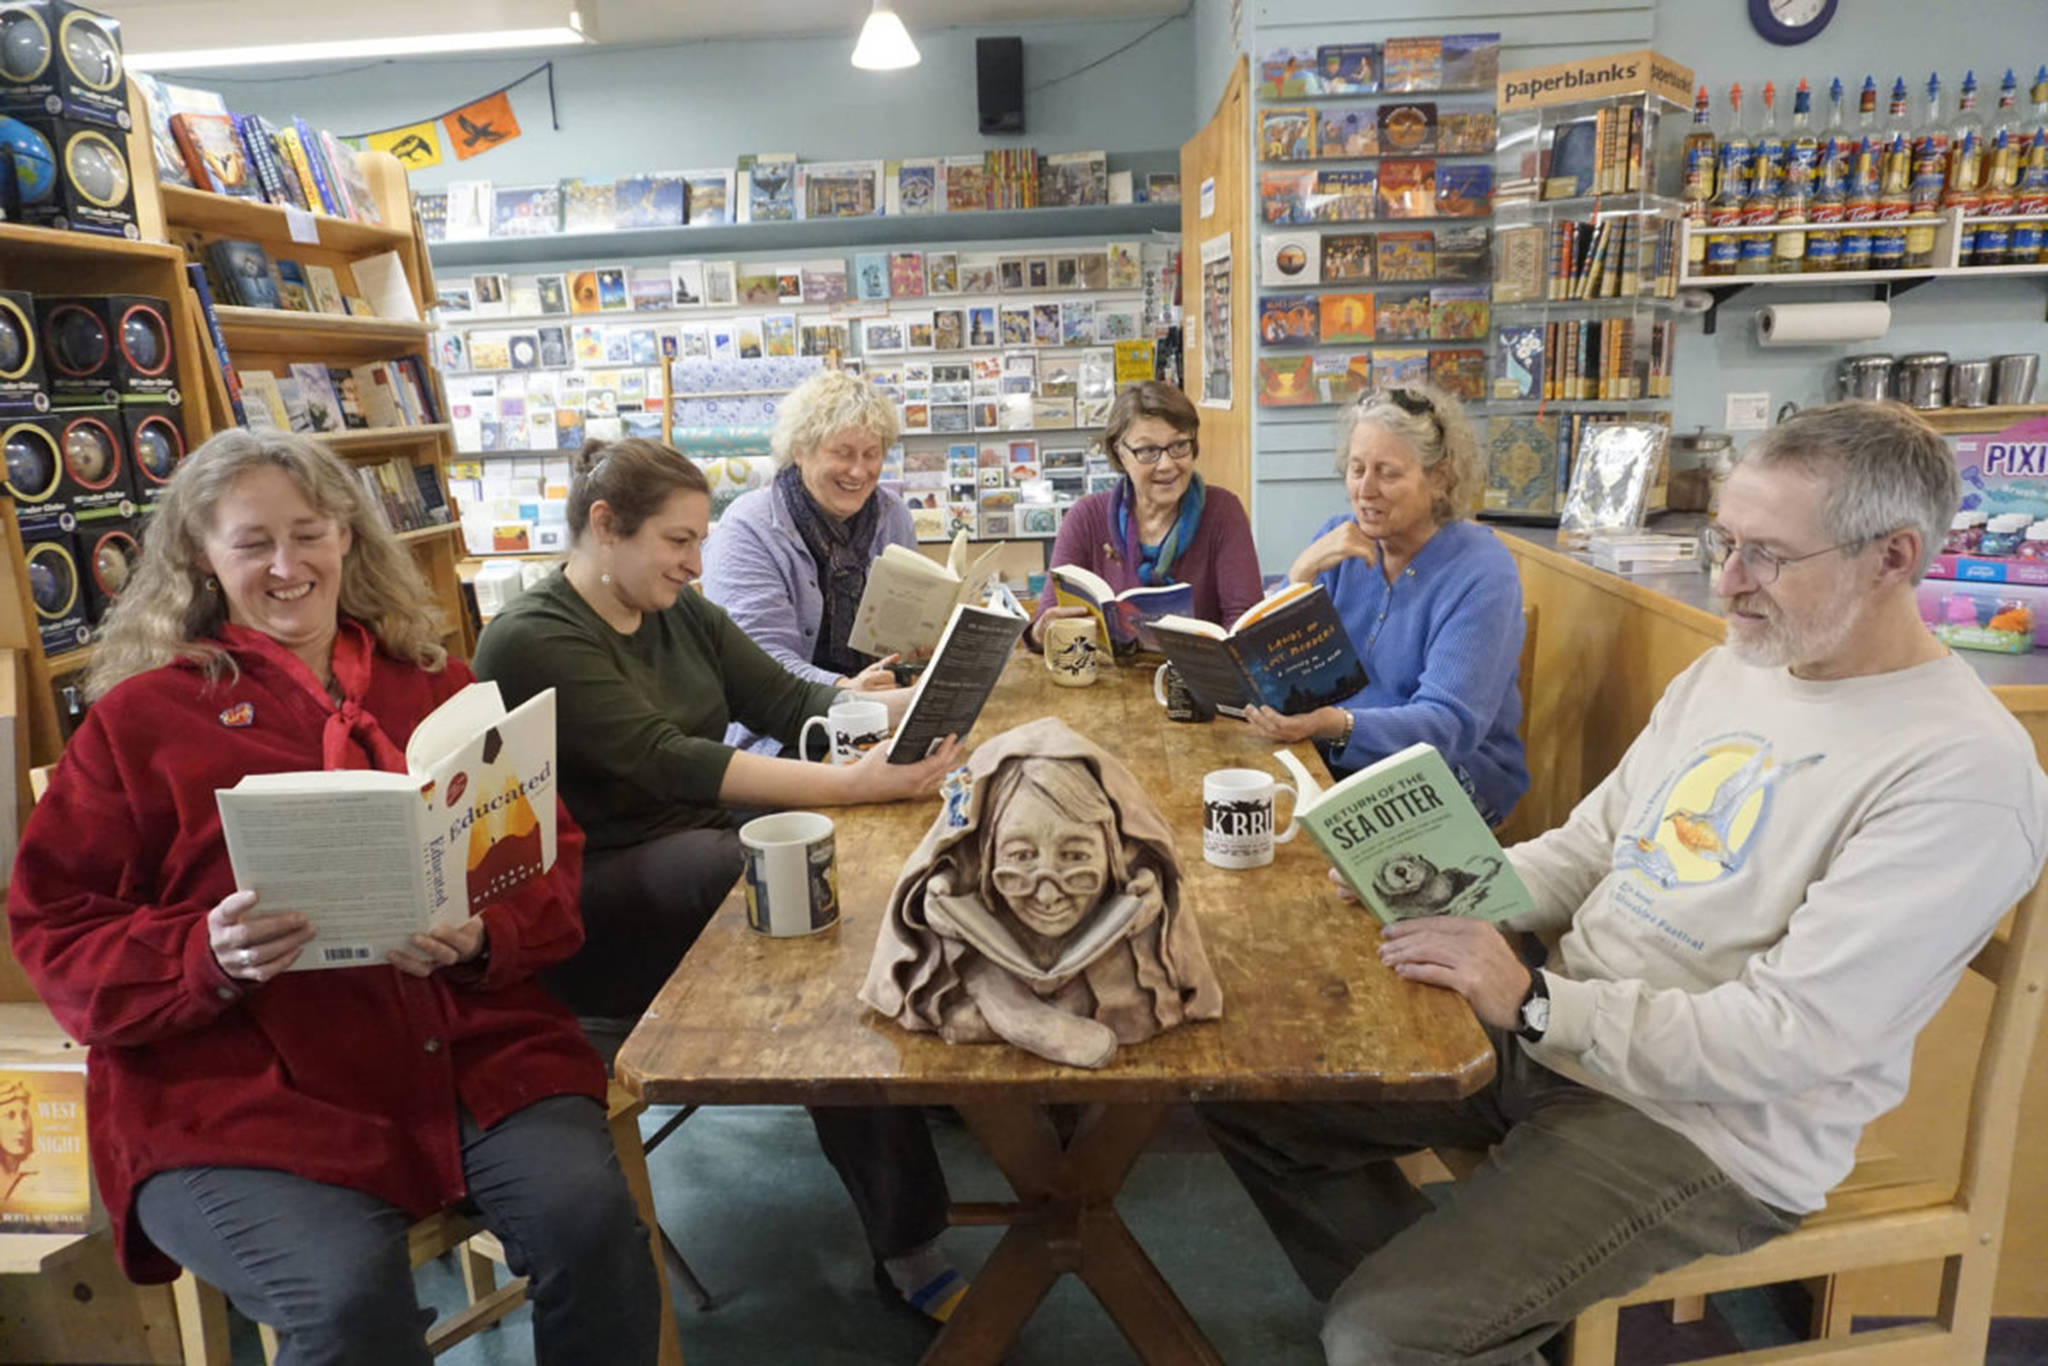 The staff and partners in the Homer Bookstore pictured Oct. 29, 2018 at the store in Homer, Alaska. (Homer News file photo)